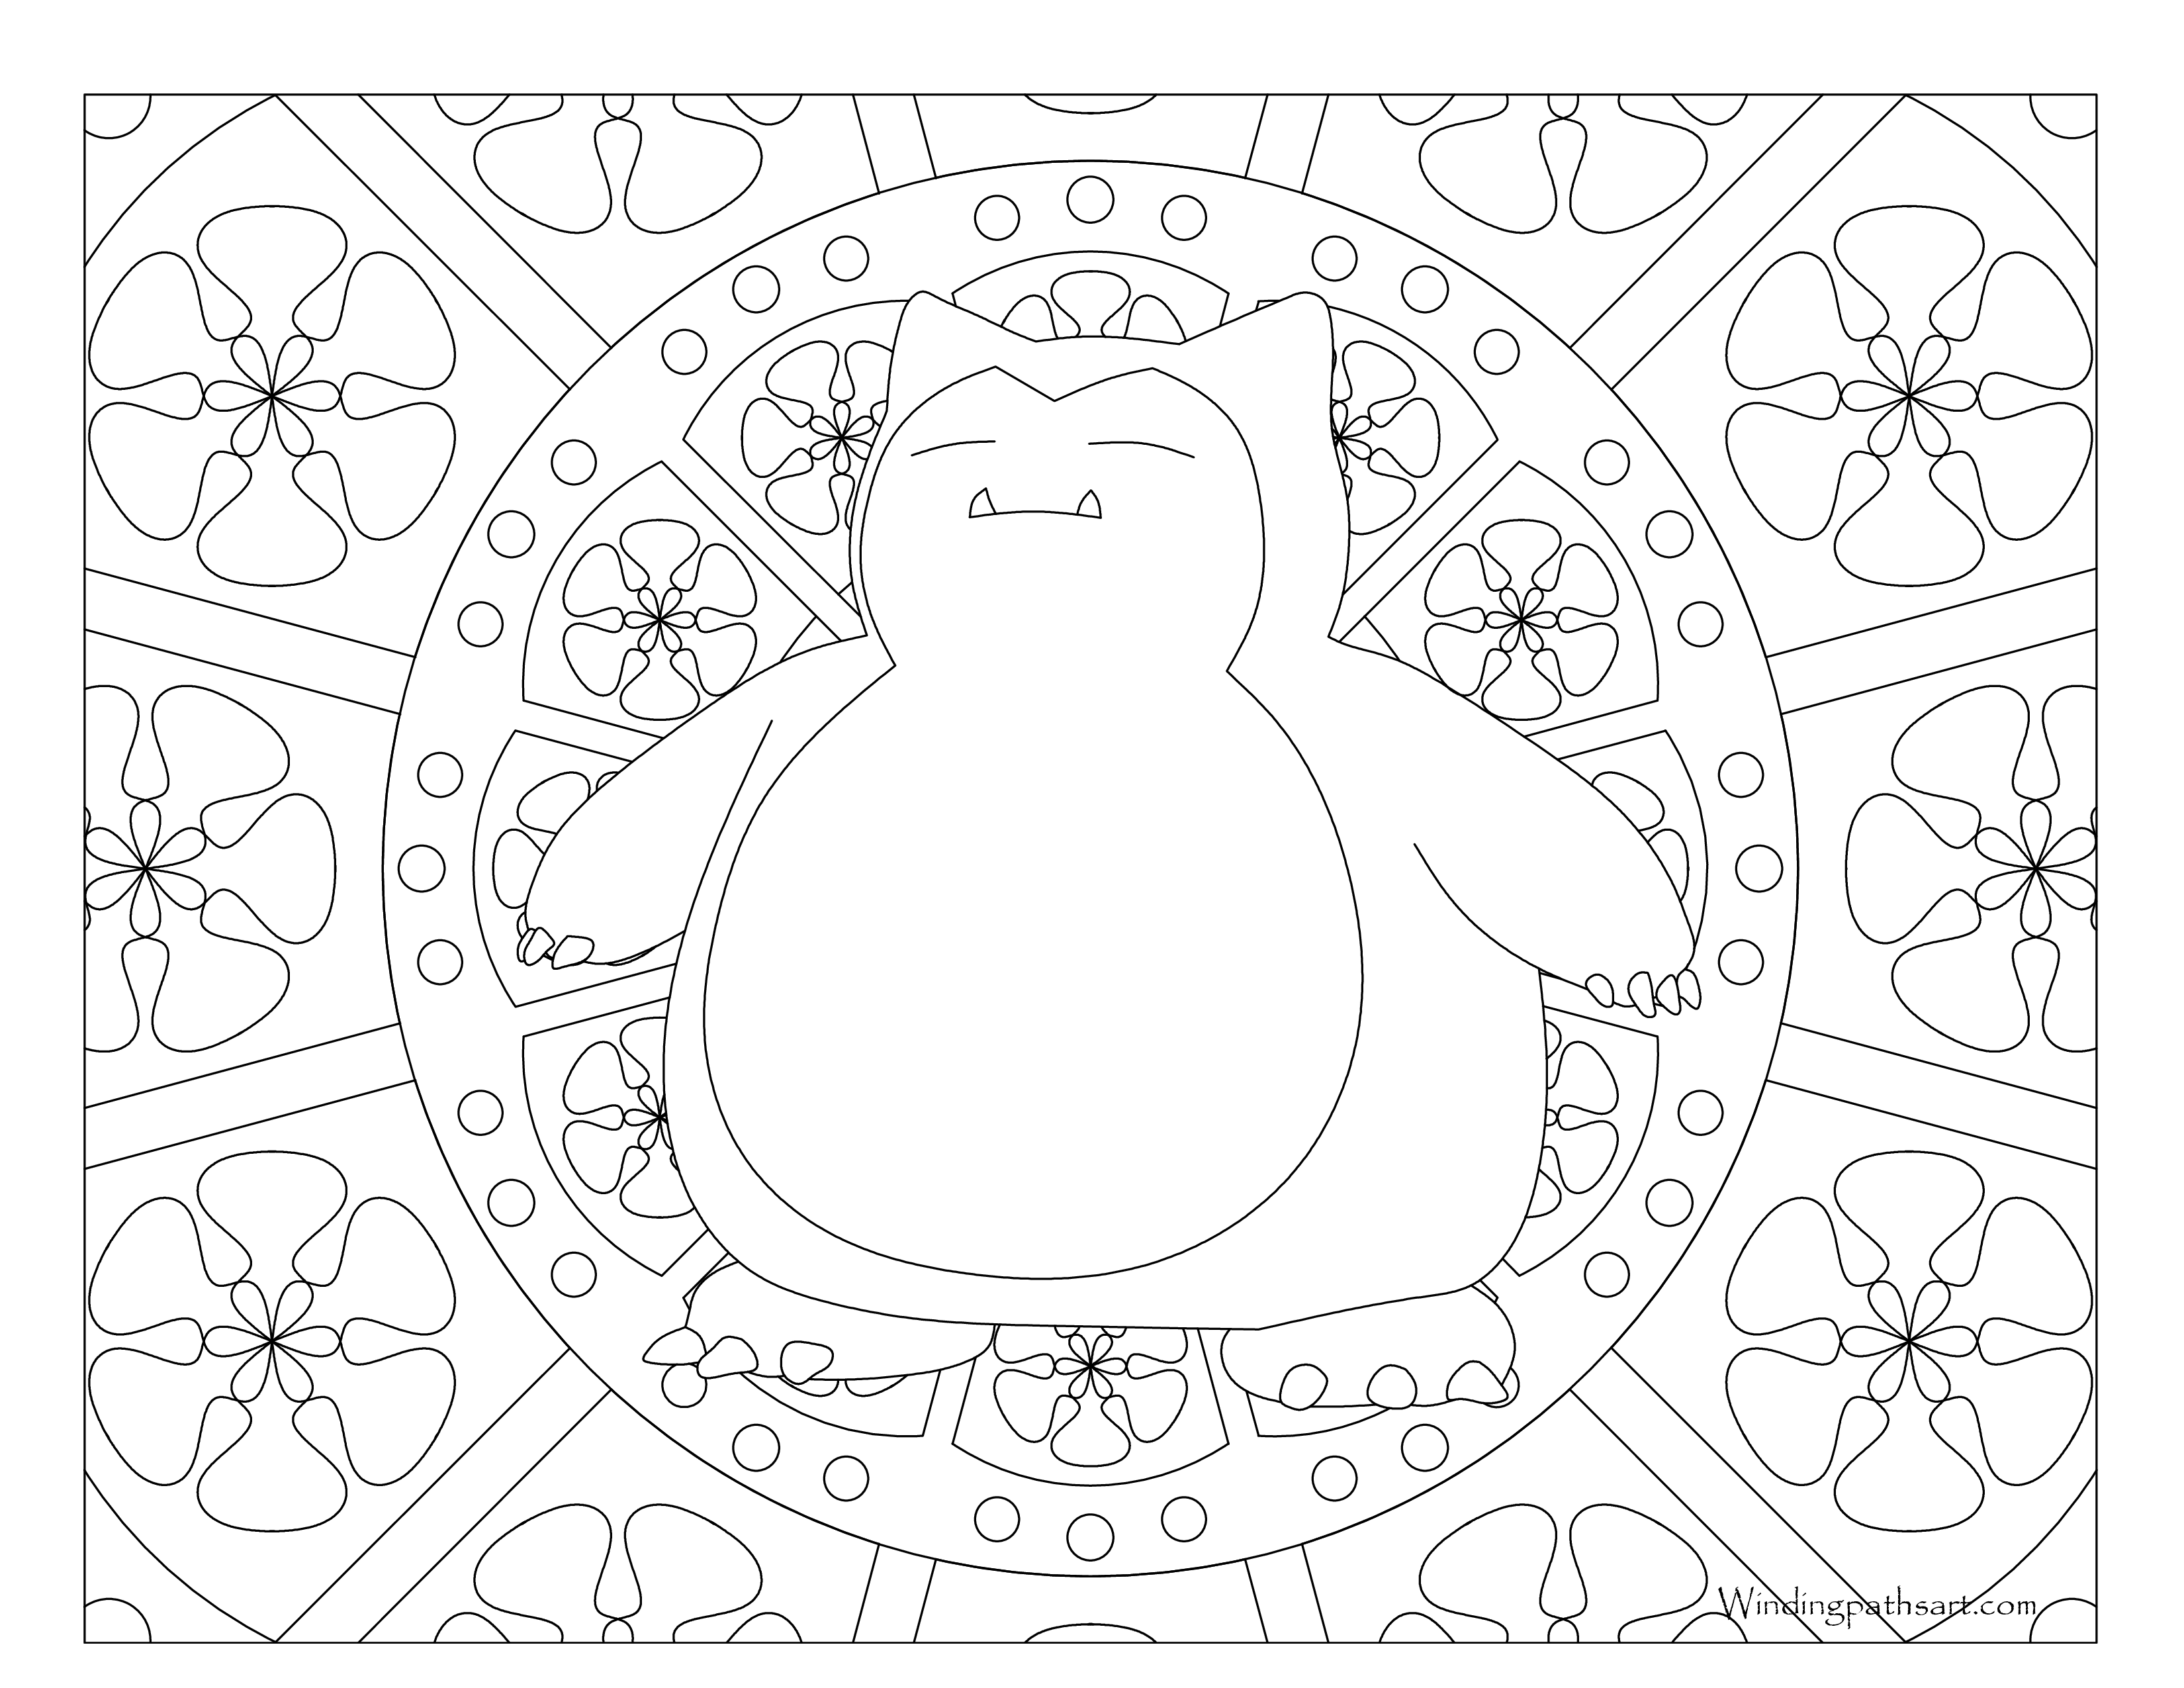 Pokemon Coloring Pages Snorlax at GetColorings.com | Free printable